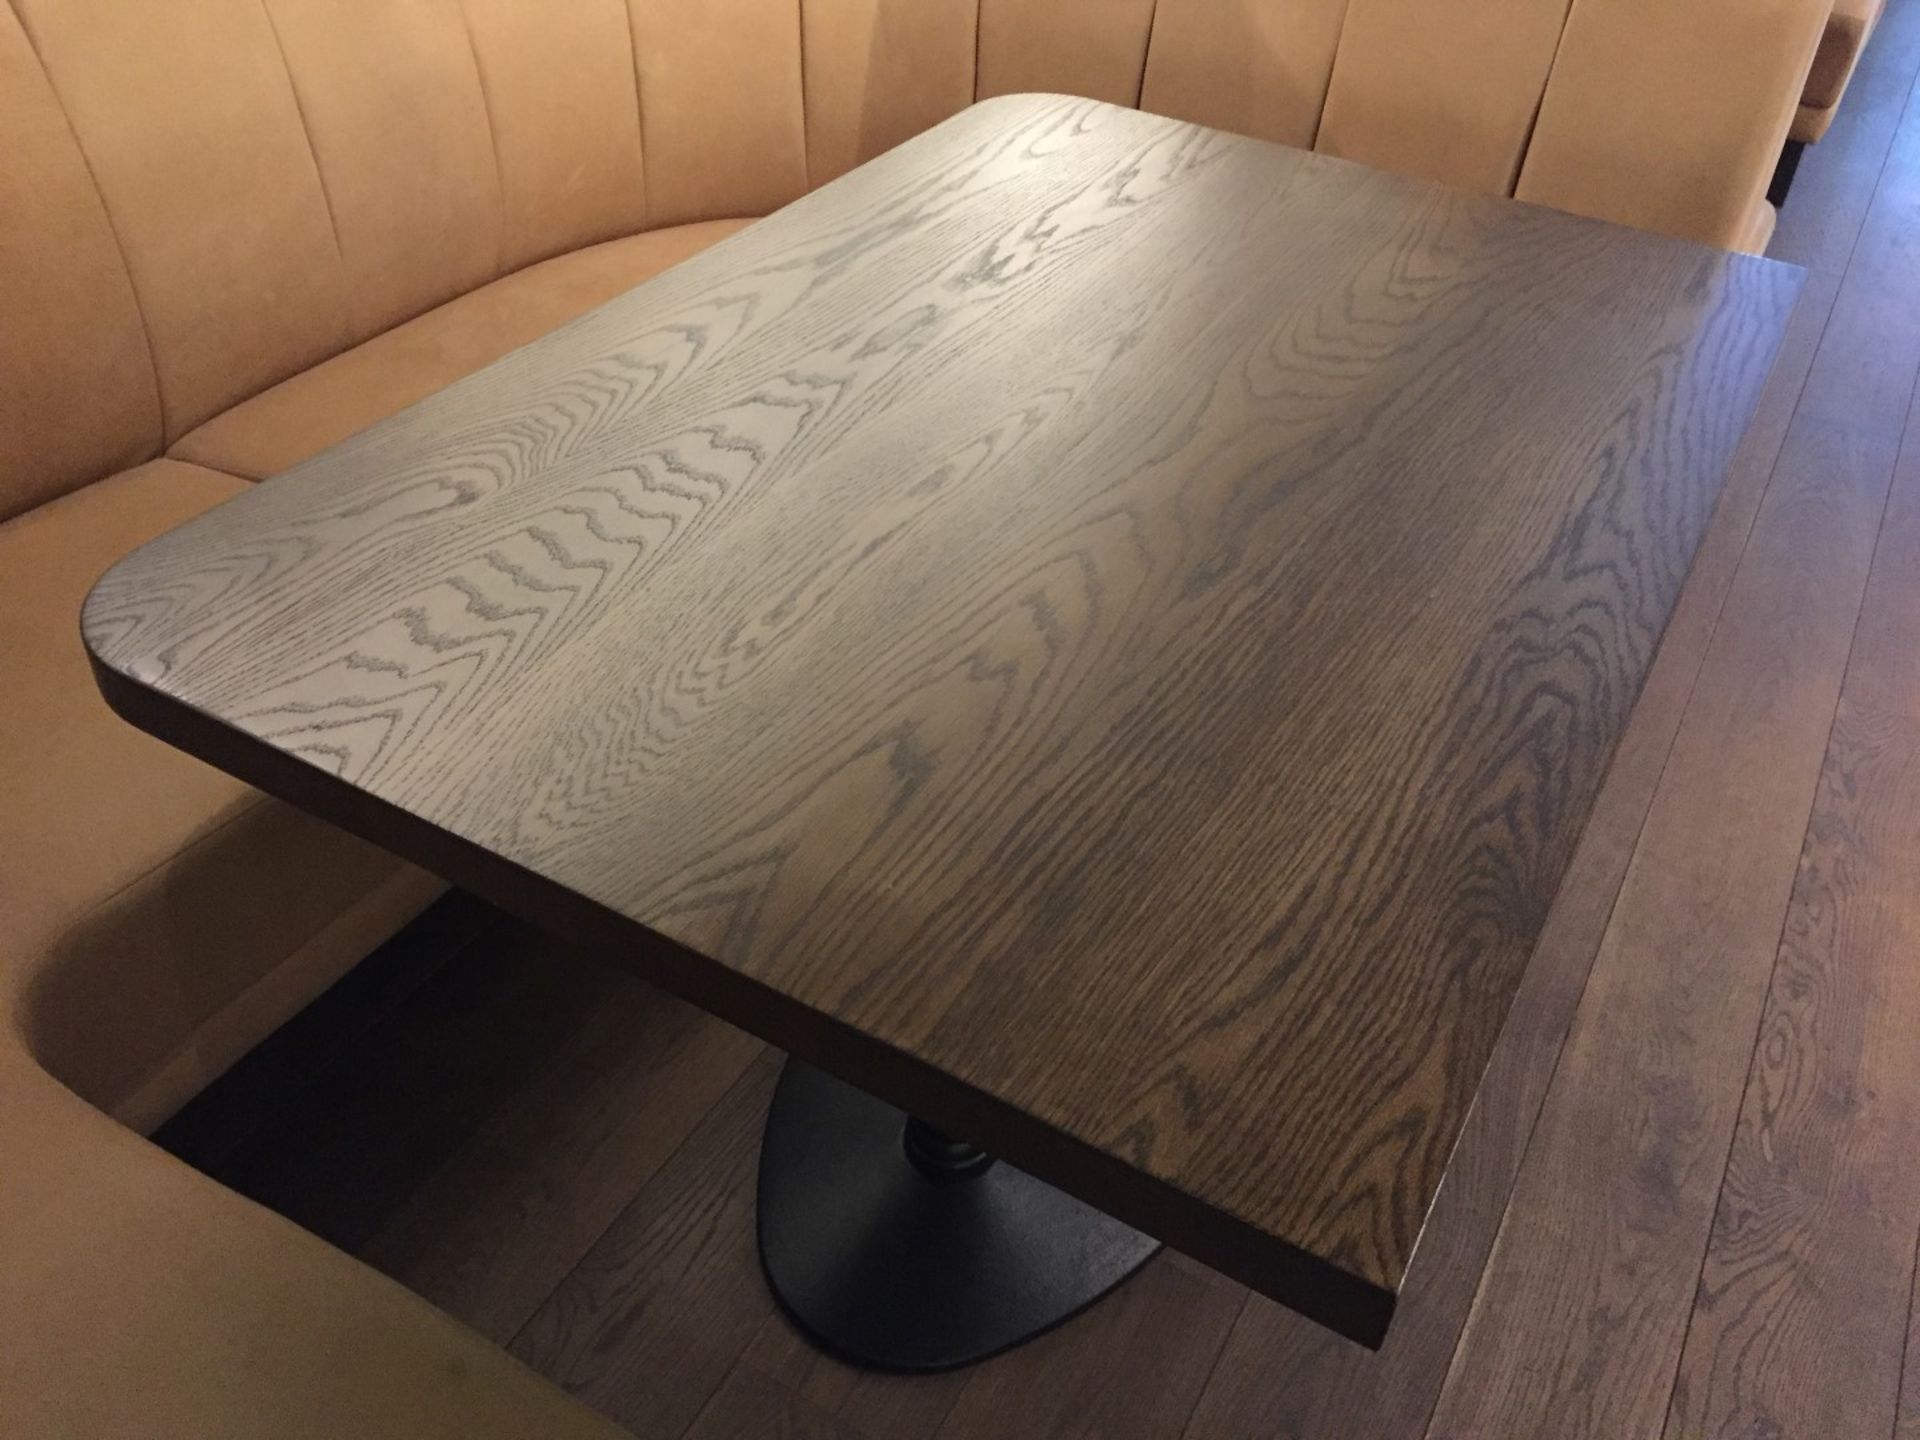 1 x Luxurious High End Shaped Restaurant Table - Features A Stunning Solid Wood Top With A - Image 2 of 10